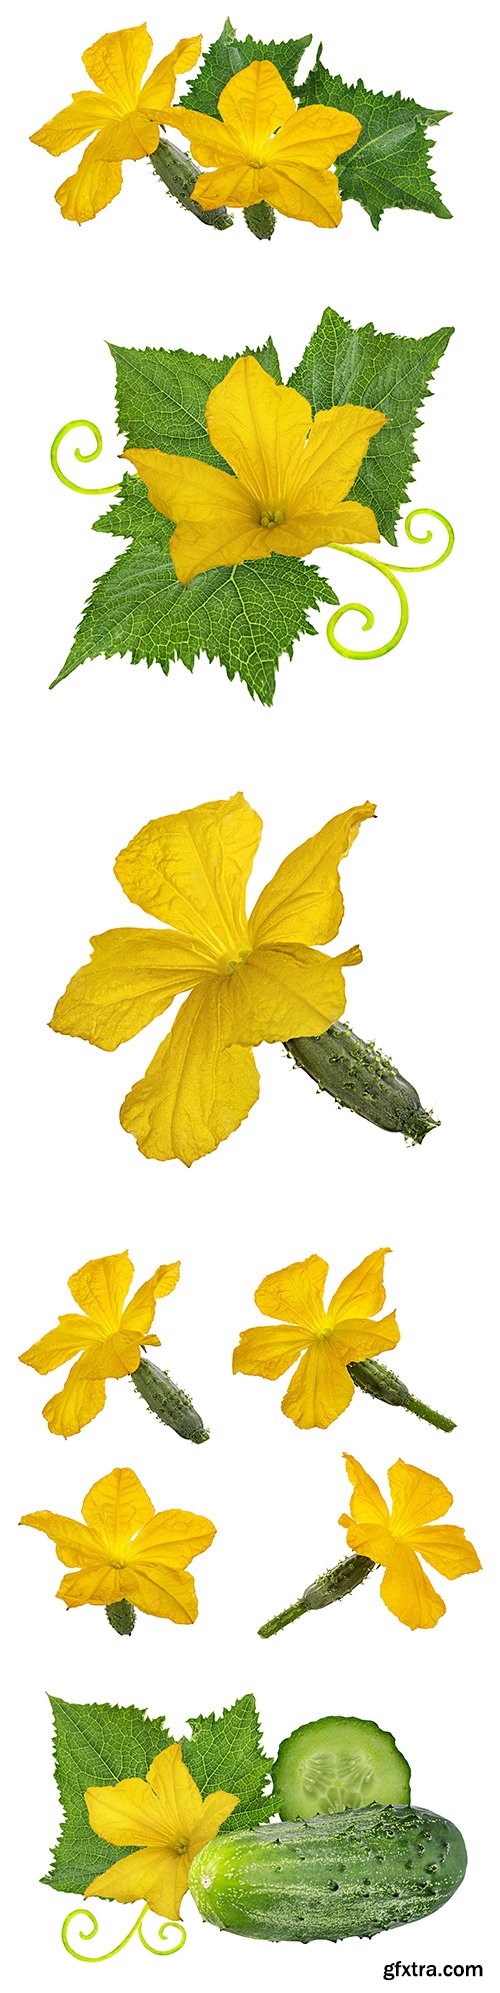 Cucumber Flower Isolated - 8xJPgs